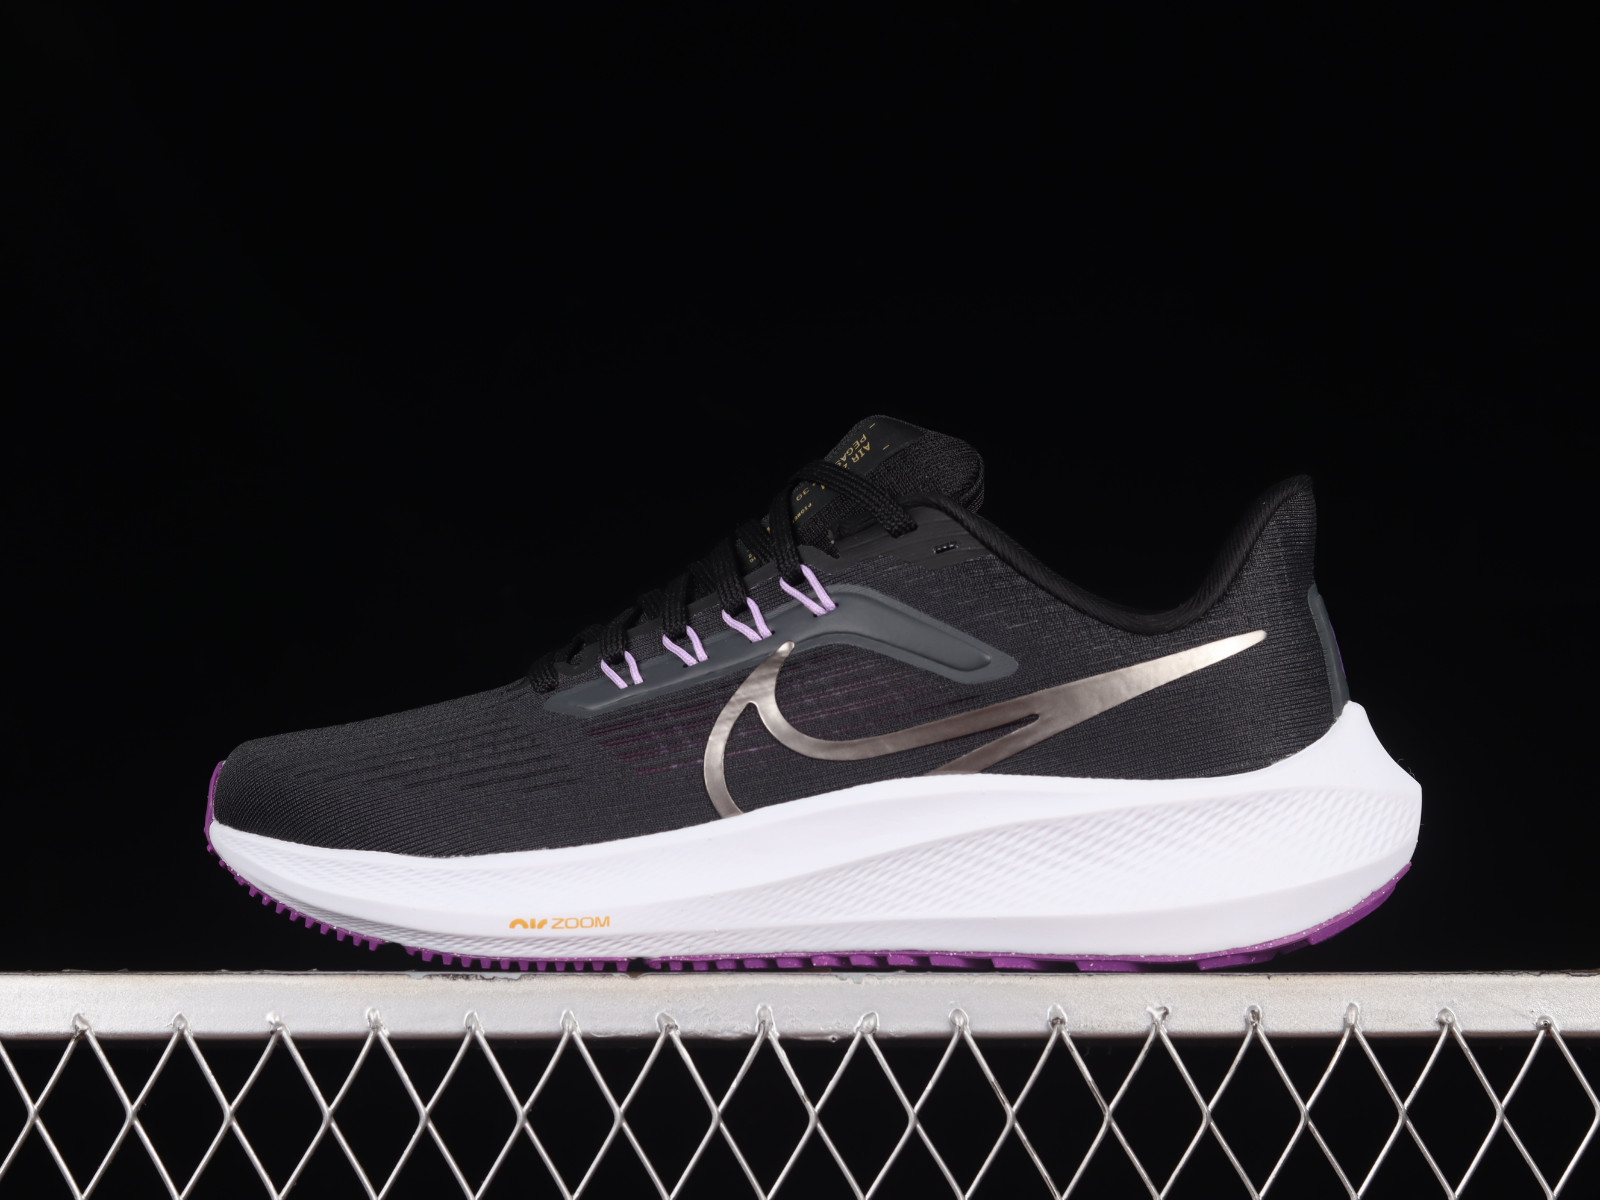 vinger Keer terug zeewier Nike Air Zoom Pegasus 39 Antrer Site Black Lilac Metallic Computer DH4071 -  008 - MultiscaleconsultingShops - nike army boots for women on amazon sale